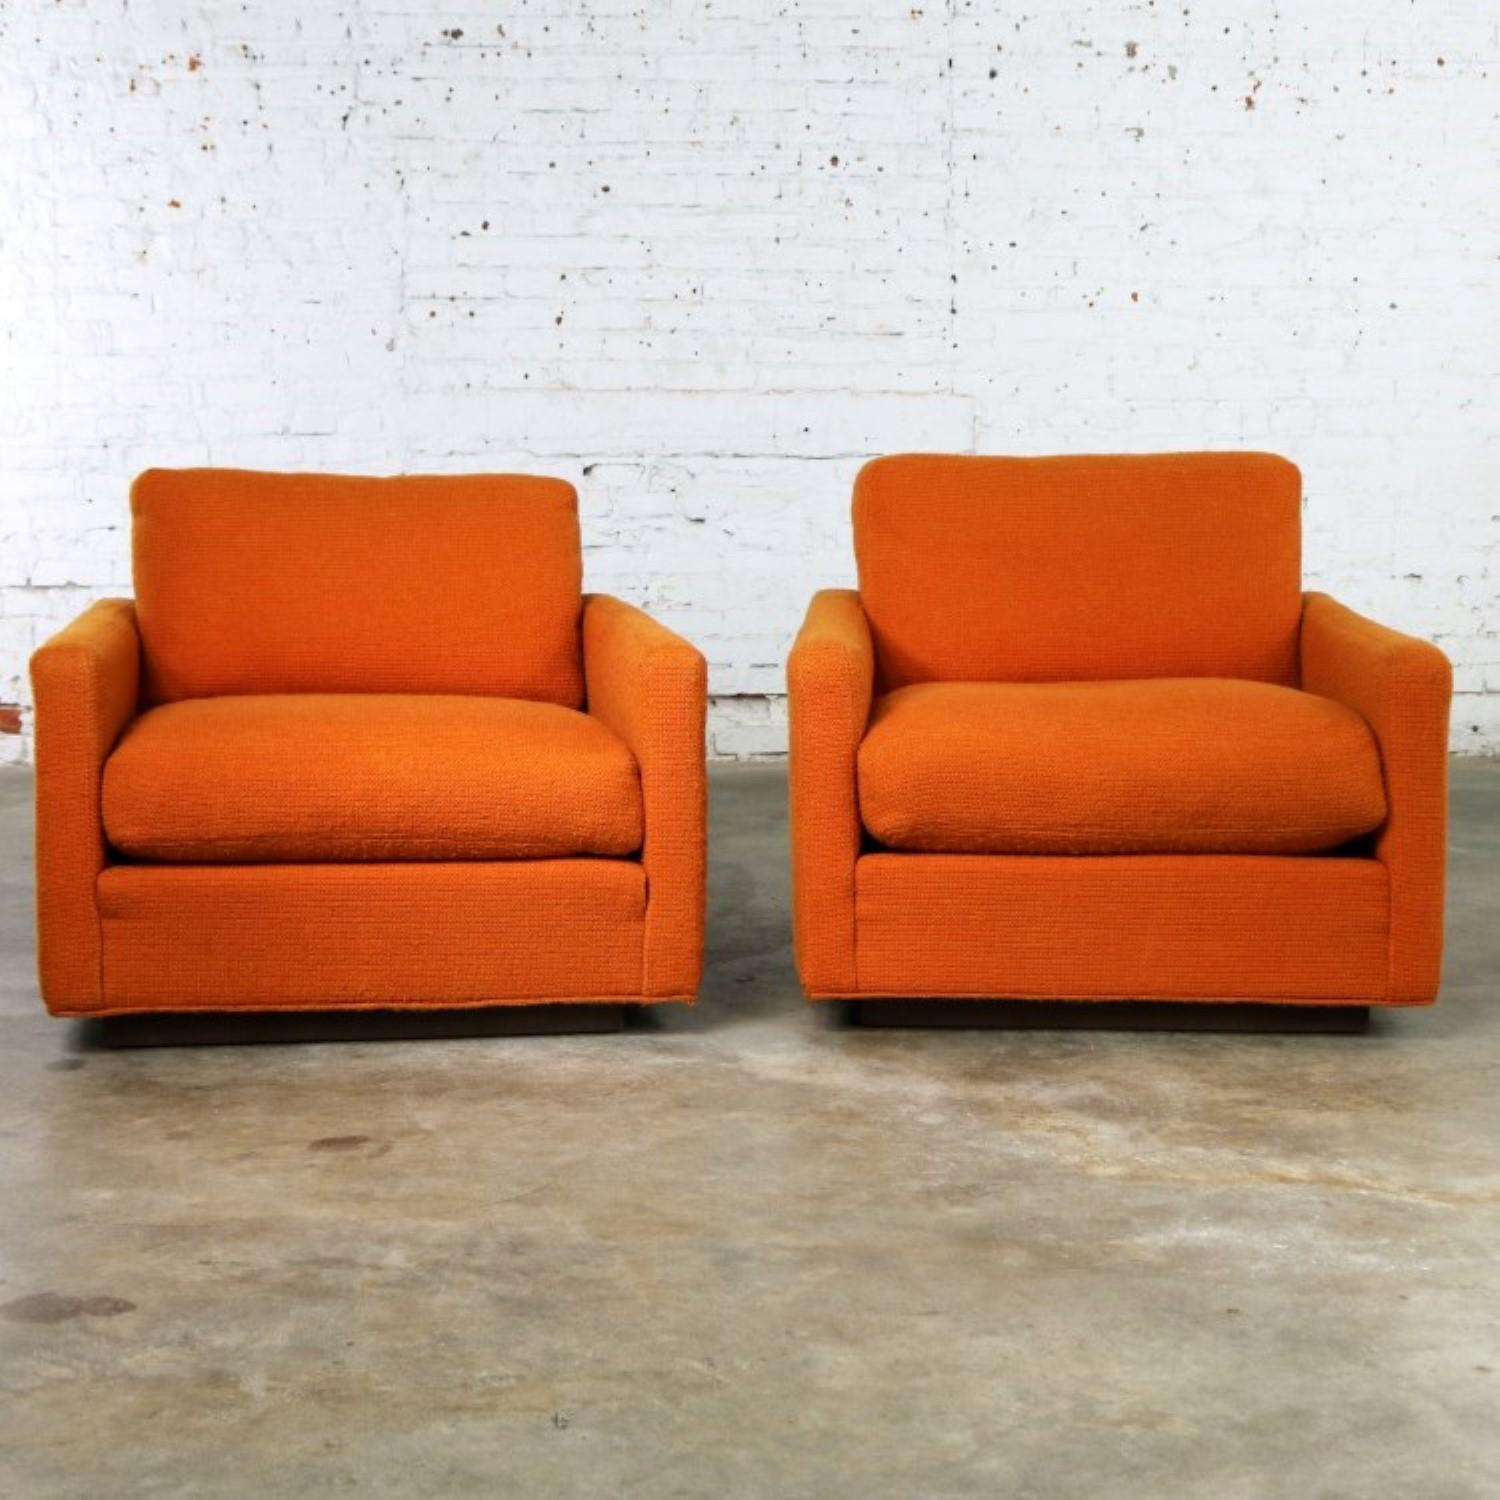 Late 20th Century Thayer Coggin Cube Lounge Chairs Orange Lawson Style Attributed to Milo Baughman